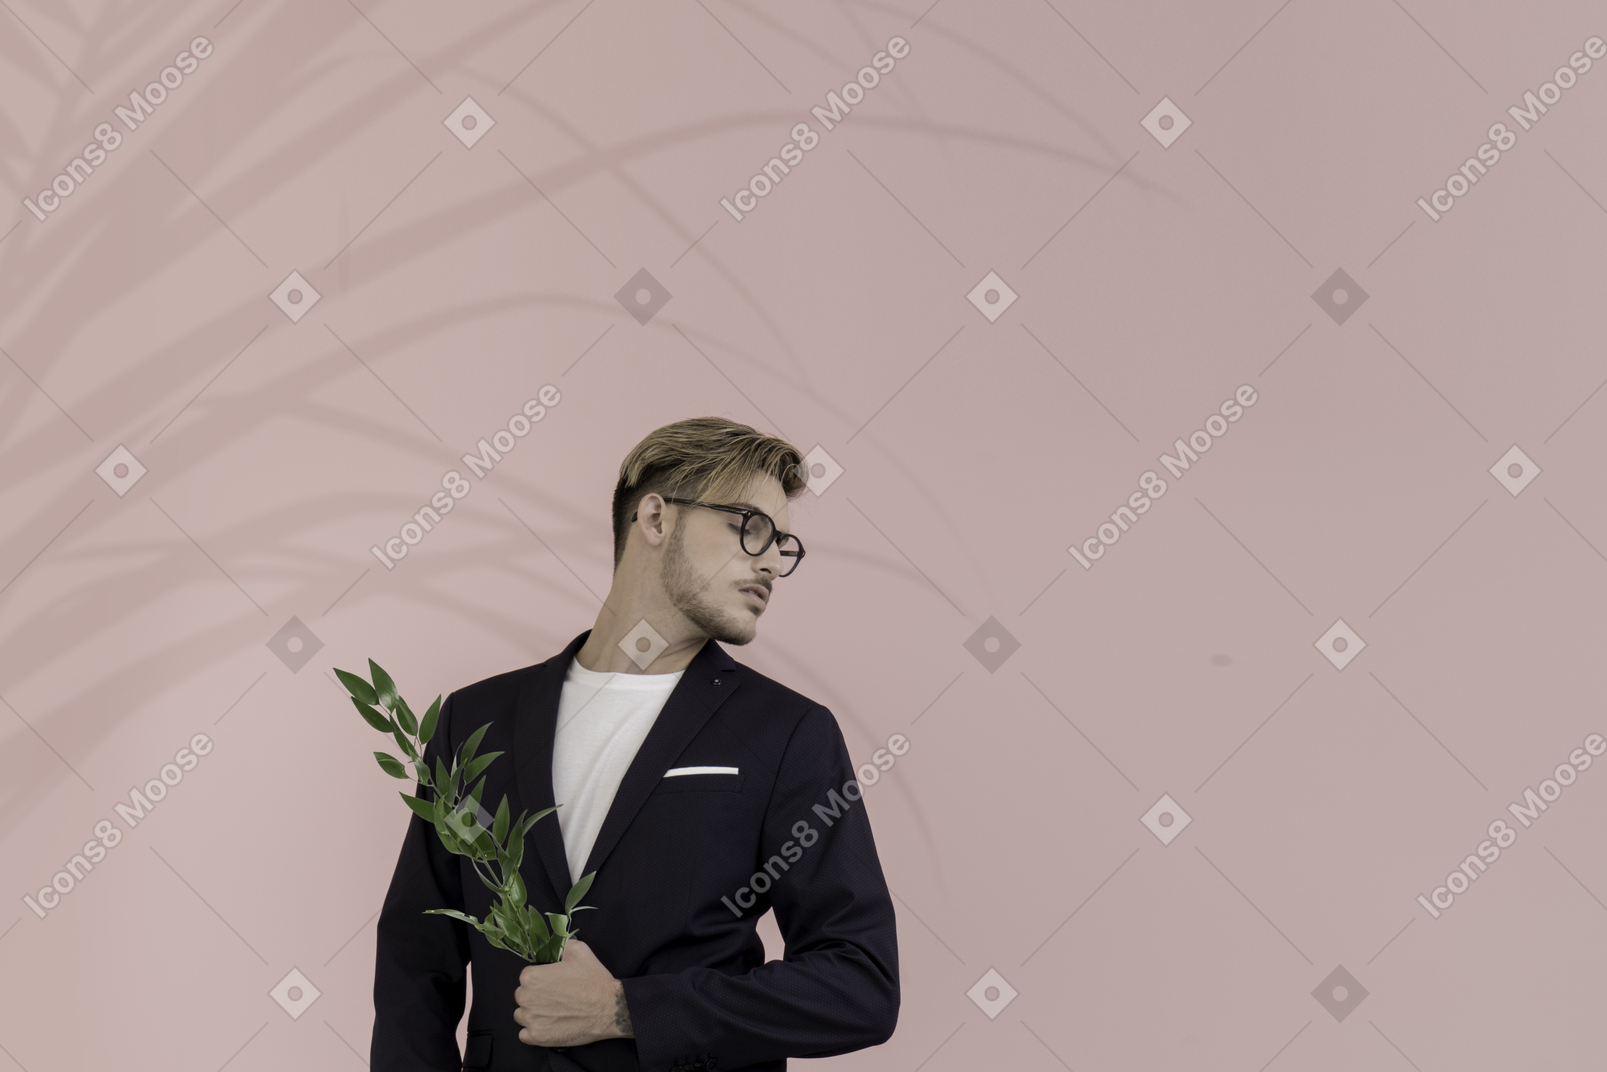 Portrait of a young man holding a laurel branch